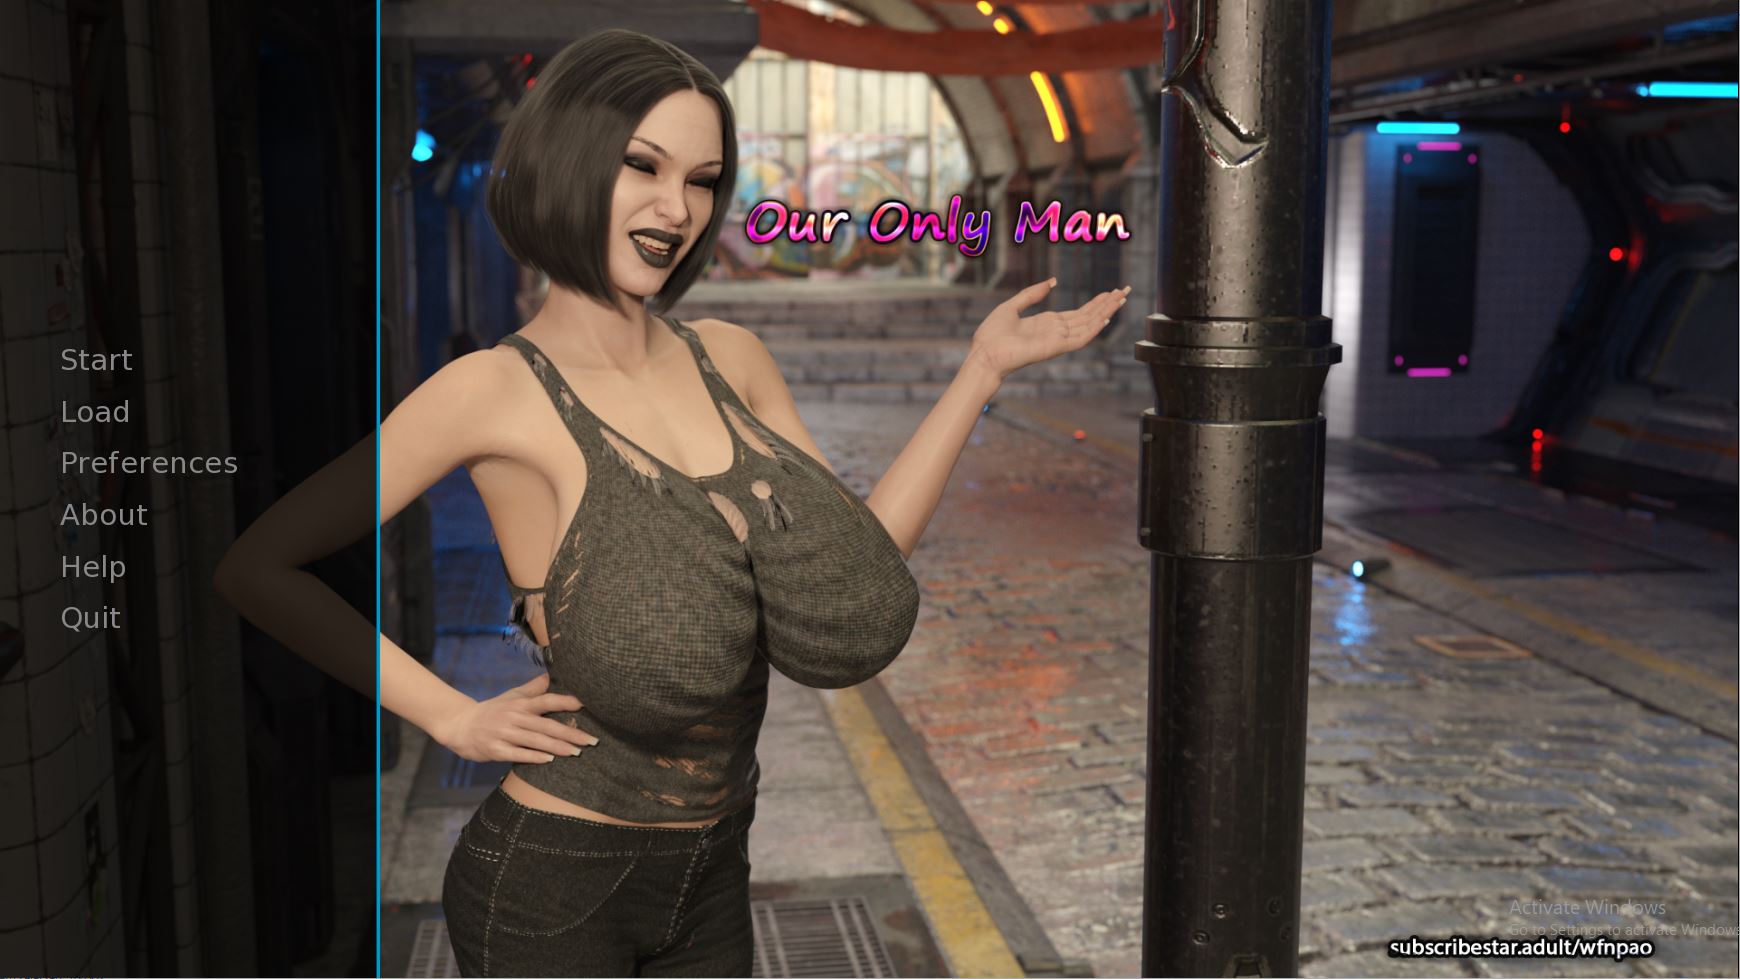 Adult Only Pc Games - Adultgamesworld: Free Porn Games & Sex Games Â» Our Only Man â€“ New Version  0.17 [WFNPaO]